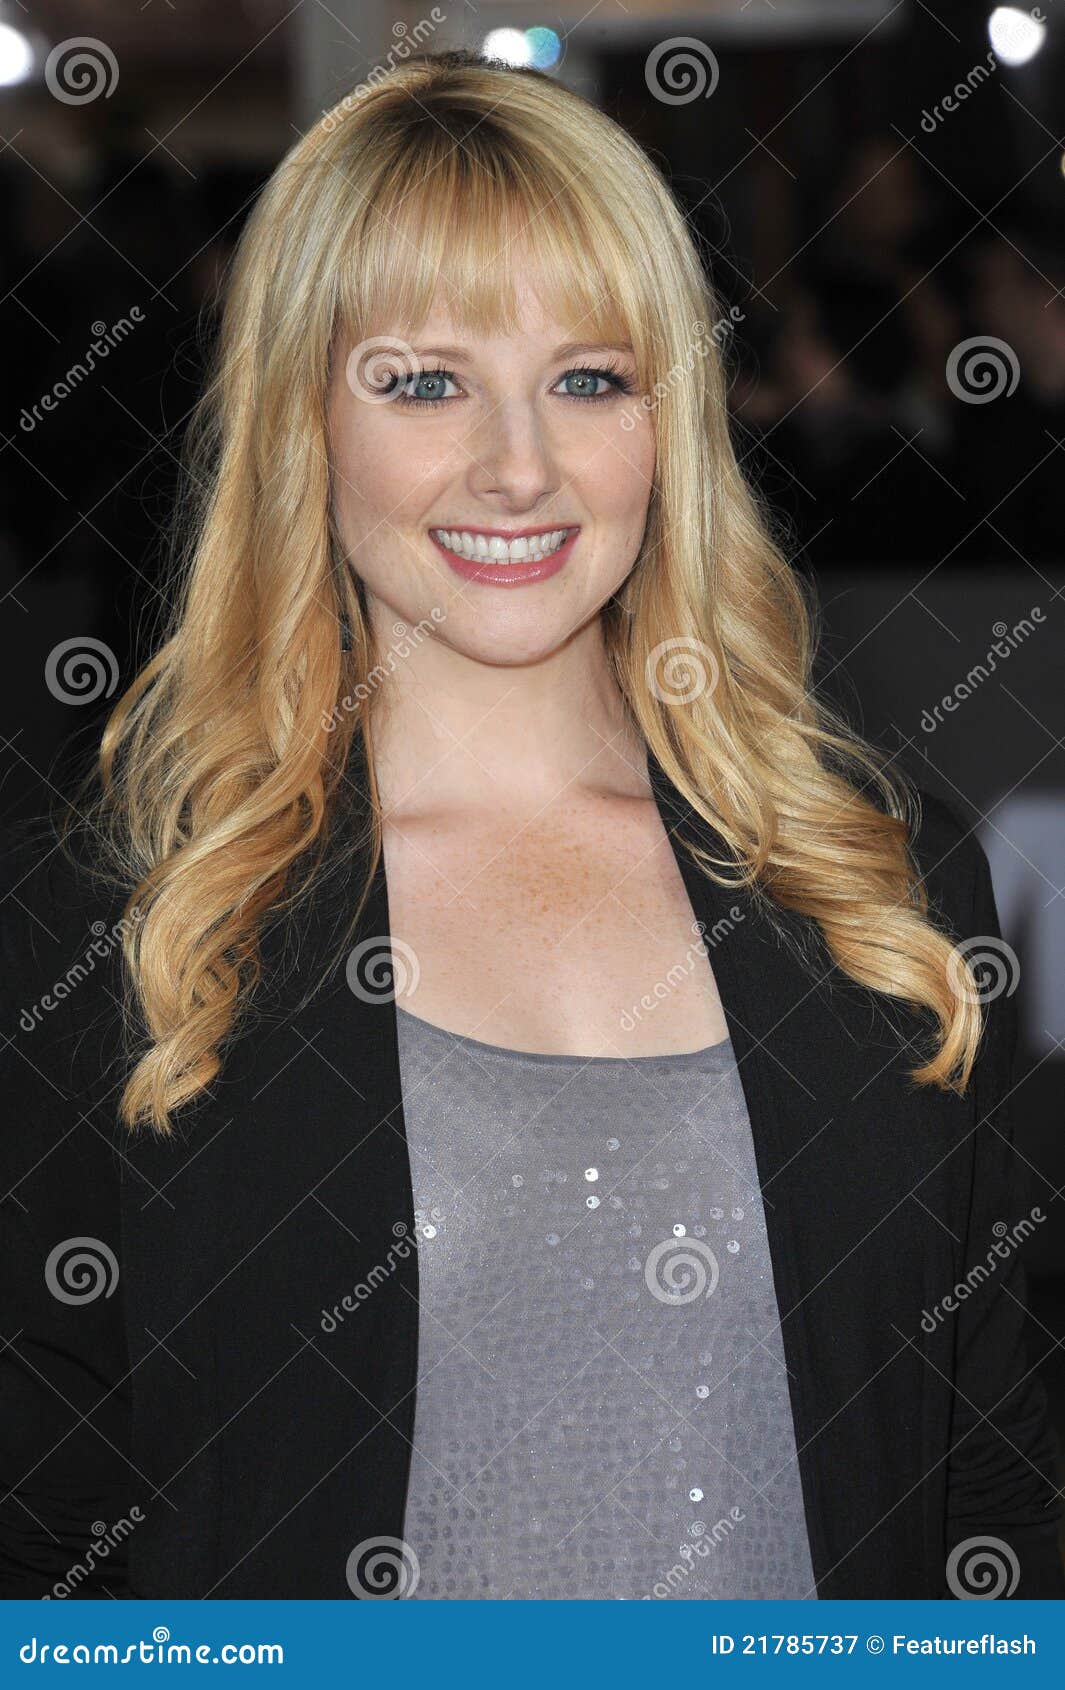 brandon takahashi add pictures of melissa rauch photo